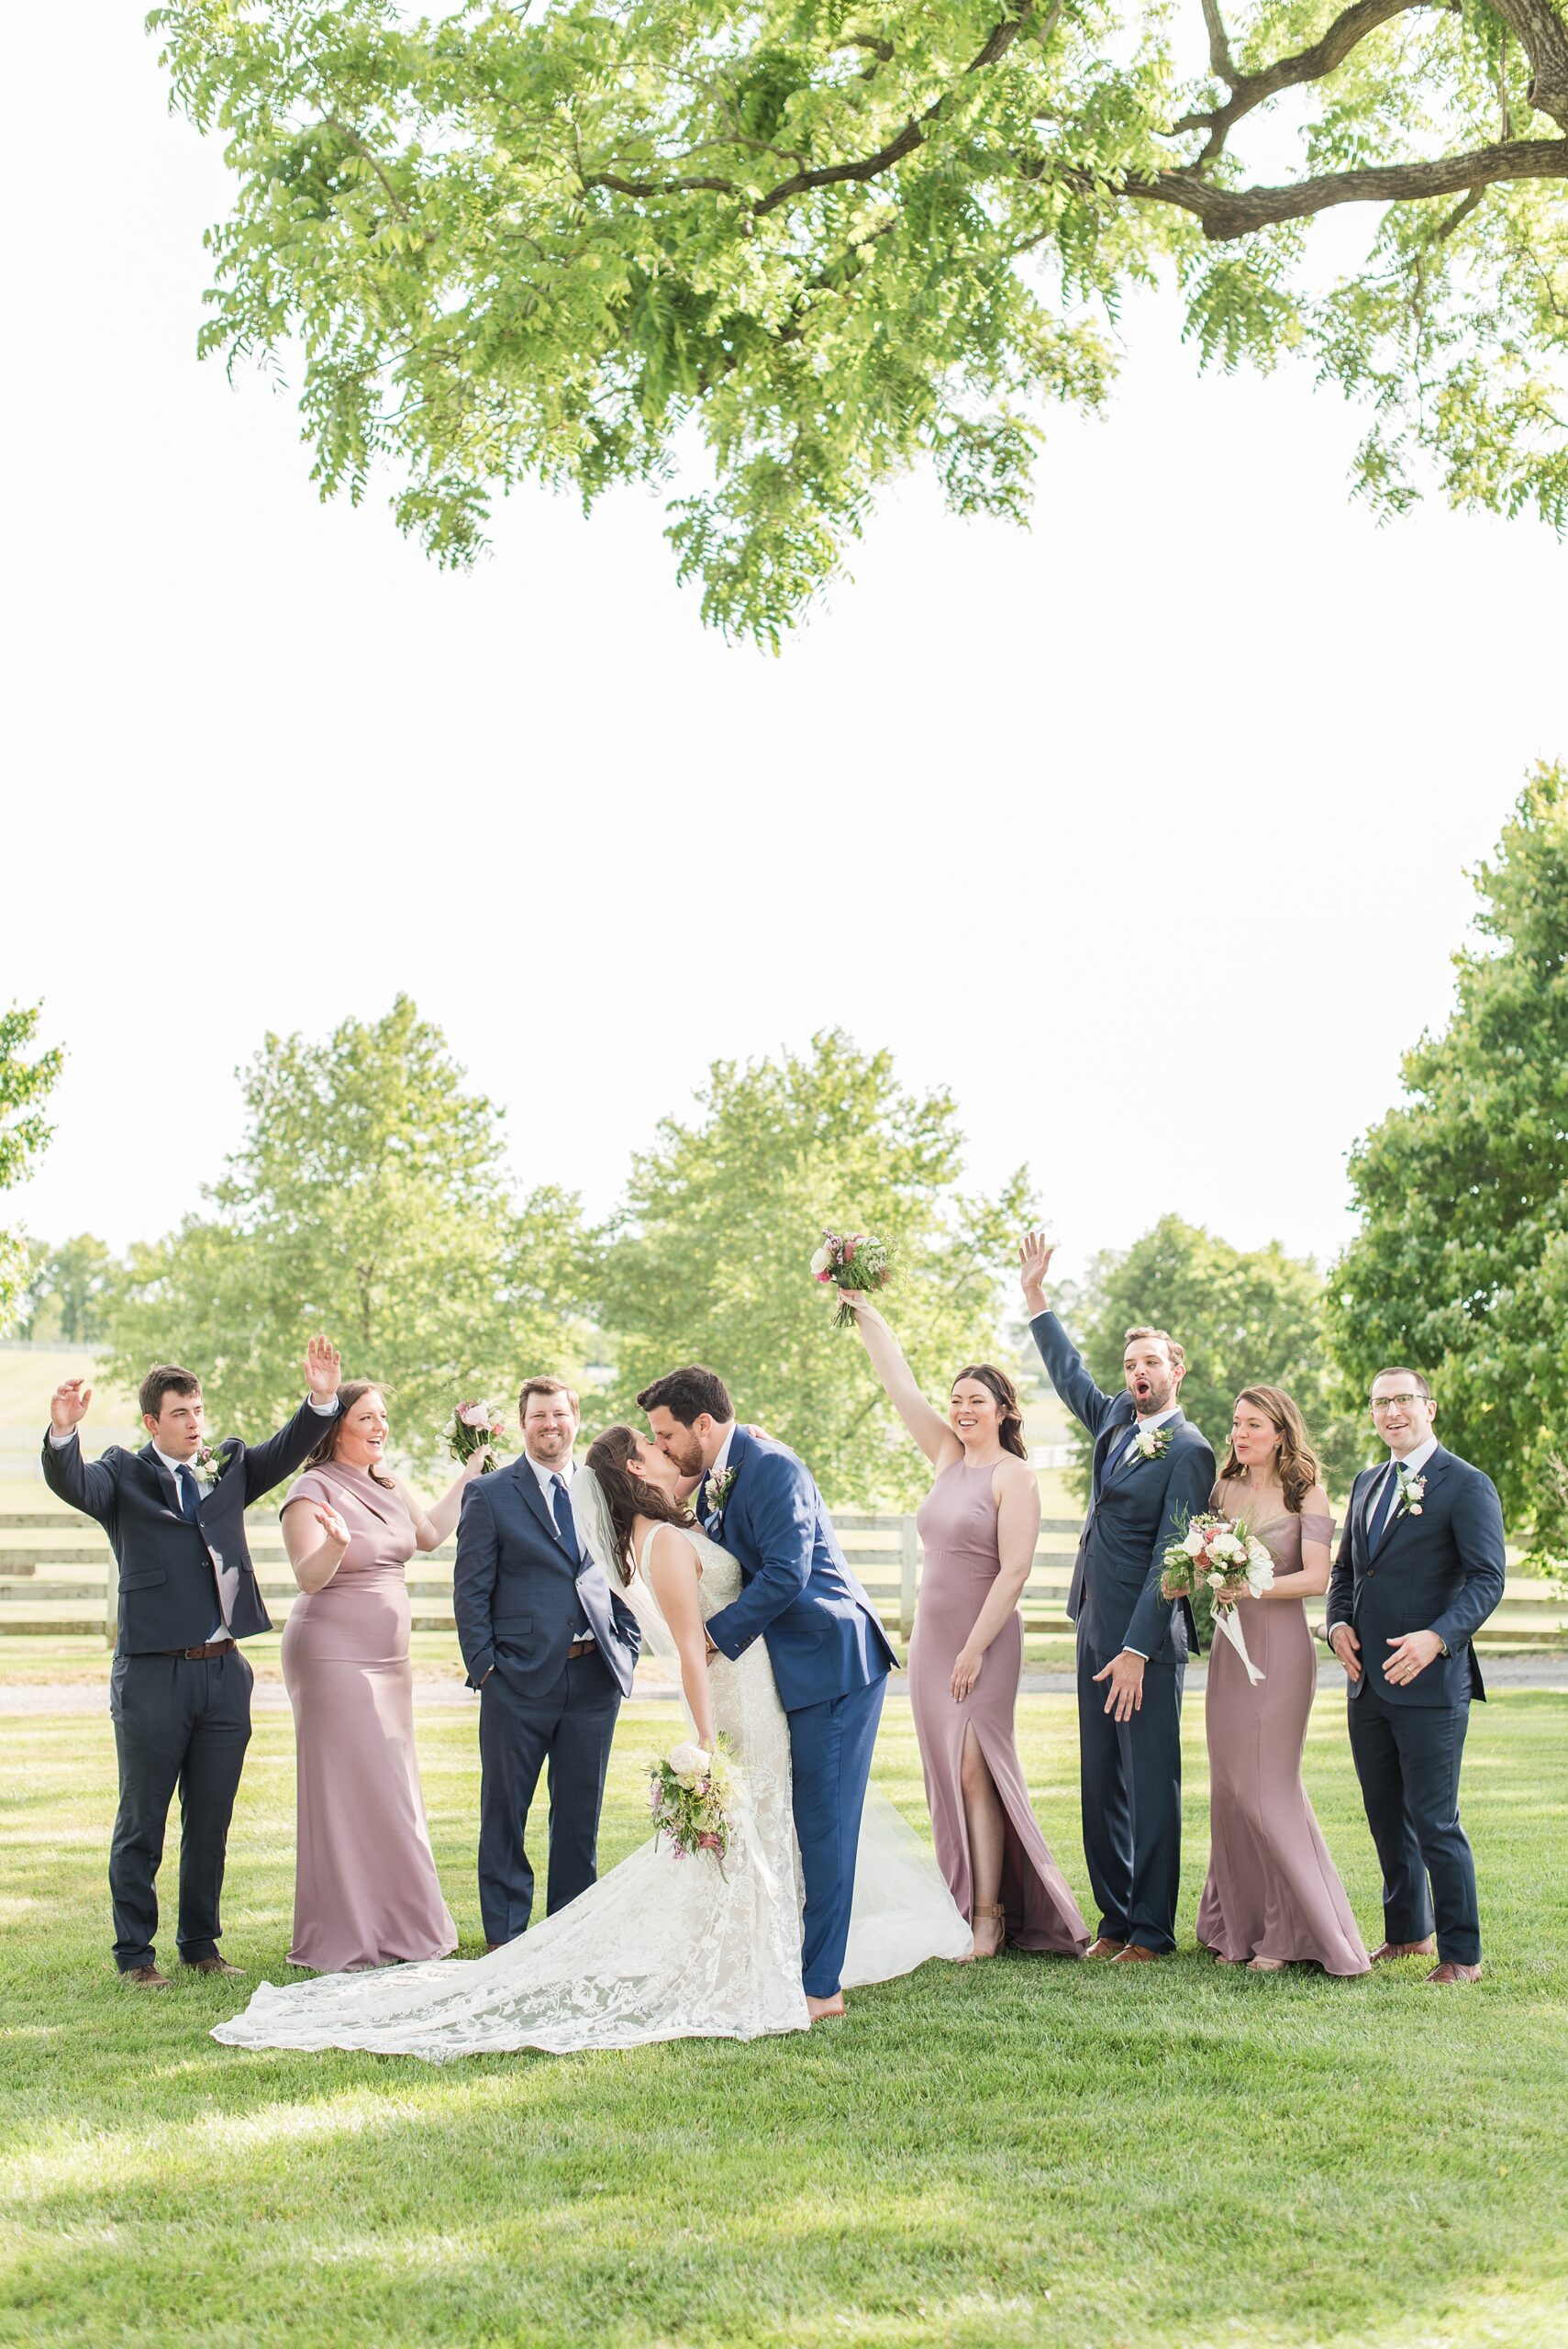 Newlyweds kiss while celebrating in a grassy lawn with their wedding party celebrating